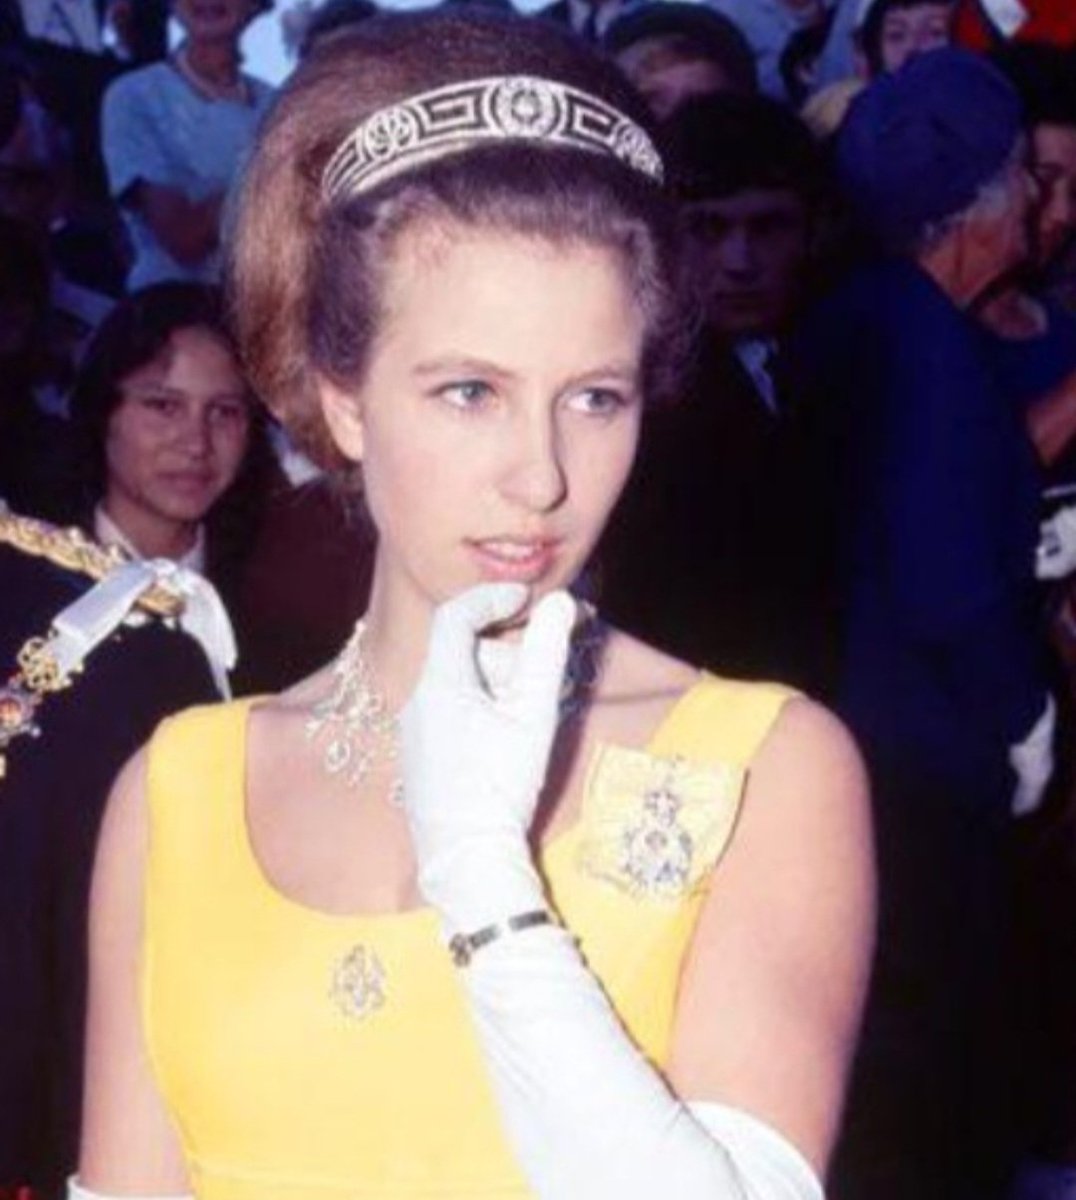 Princess Anne wearing the Meander tiara that belonged to her grandmother Princess Alice. 
Looking lovely in yellow.💛
#PrincessAnne
#PrincessRoyal
#RoyalFamily